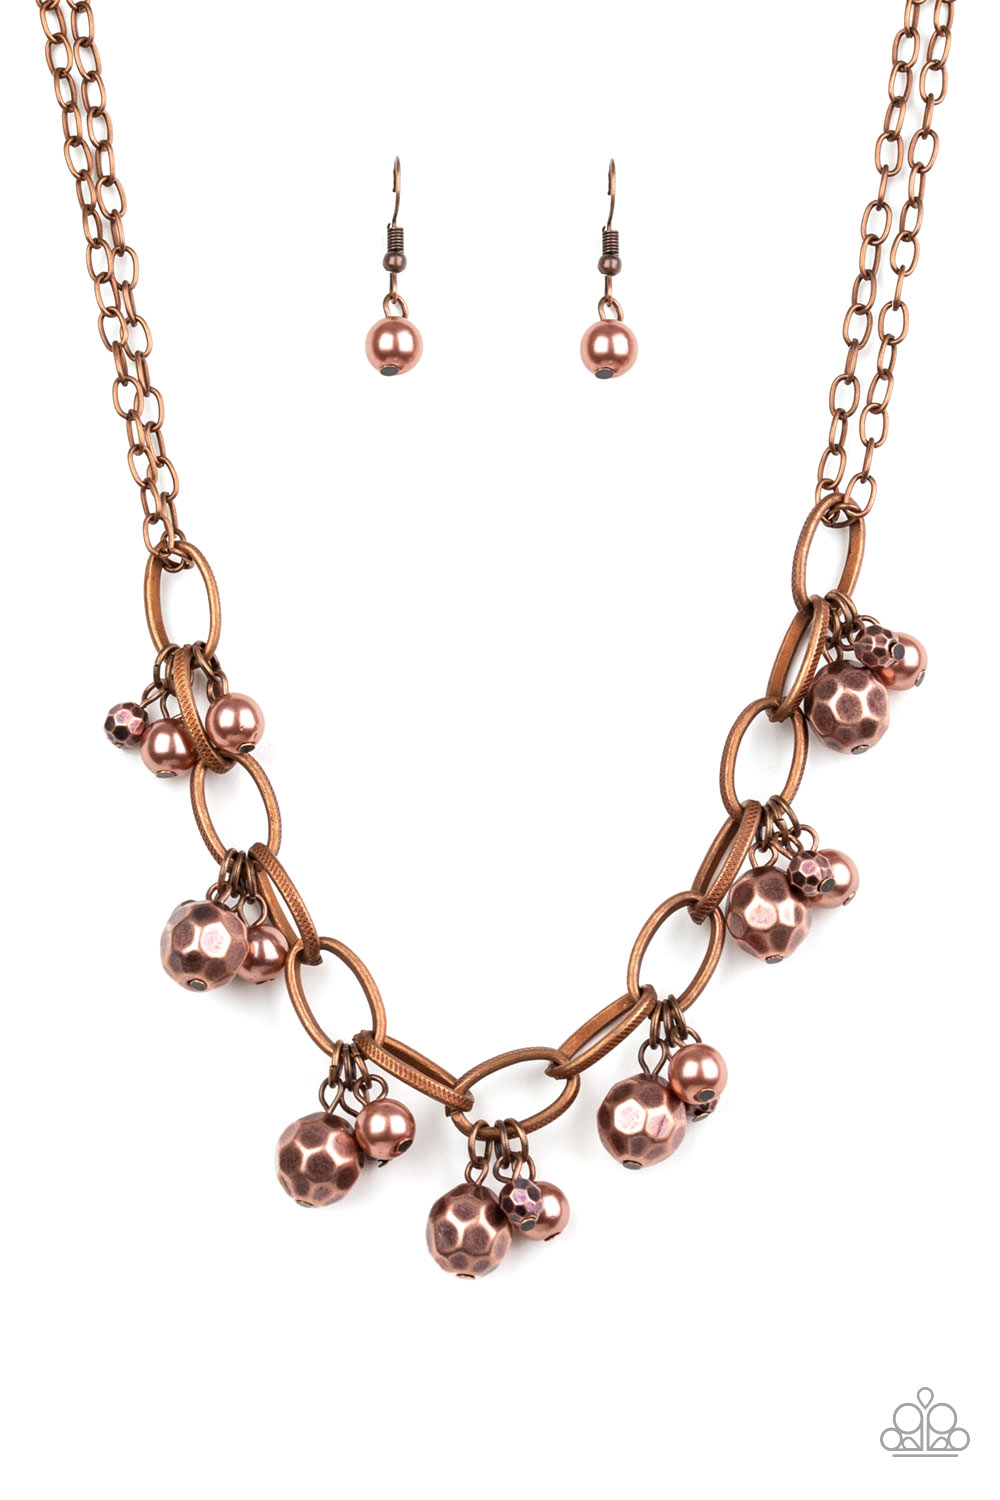 Paparazzi Necklace - Copper Varying in size, a collection of faceted copper and pearly copper beads swing from a bold copper chain, creating a whimsical metallic fringe below the collar. 